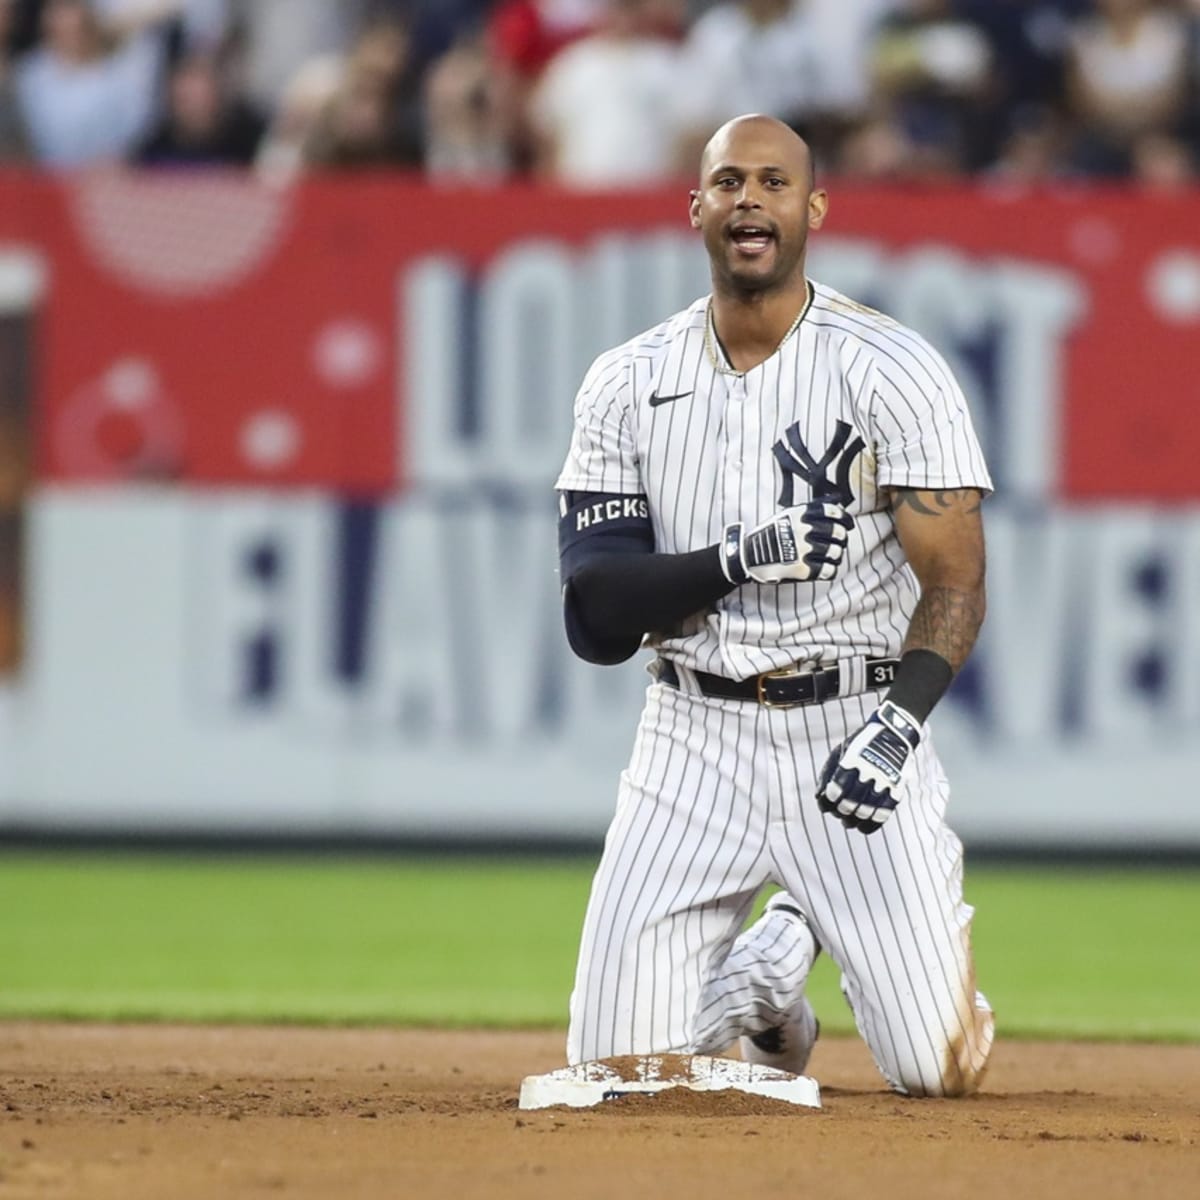 For new Yankees OF Aaron Hicks, criticism by Twins was wakeup call